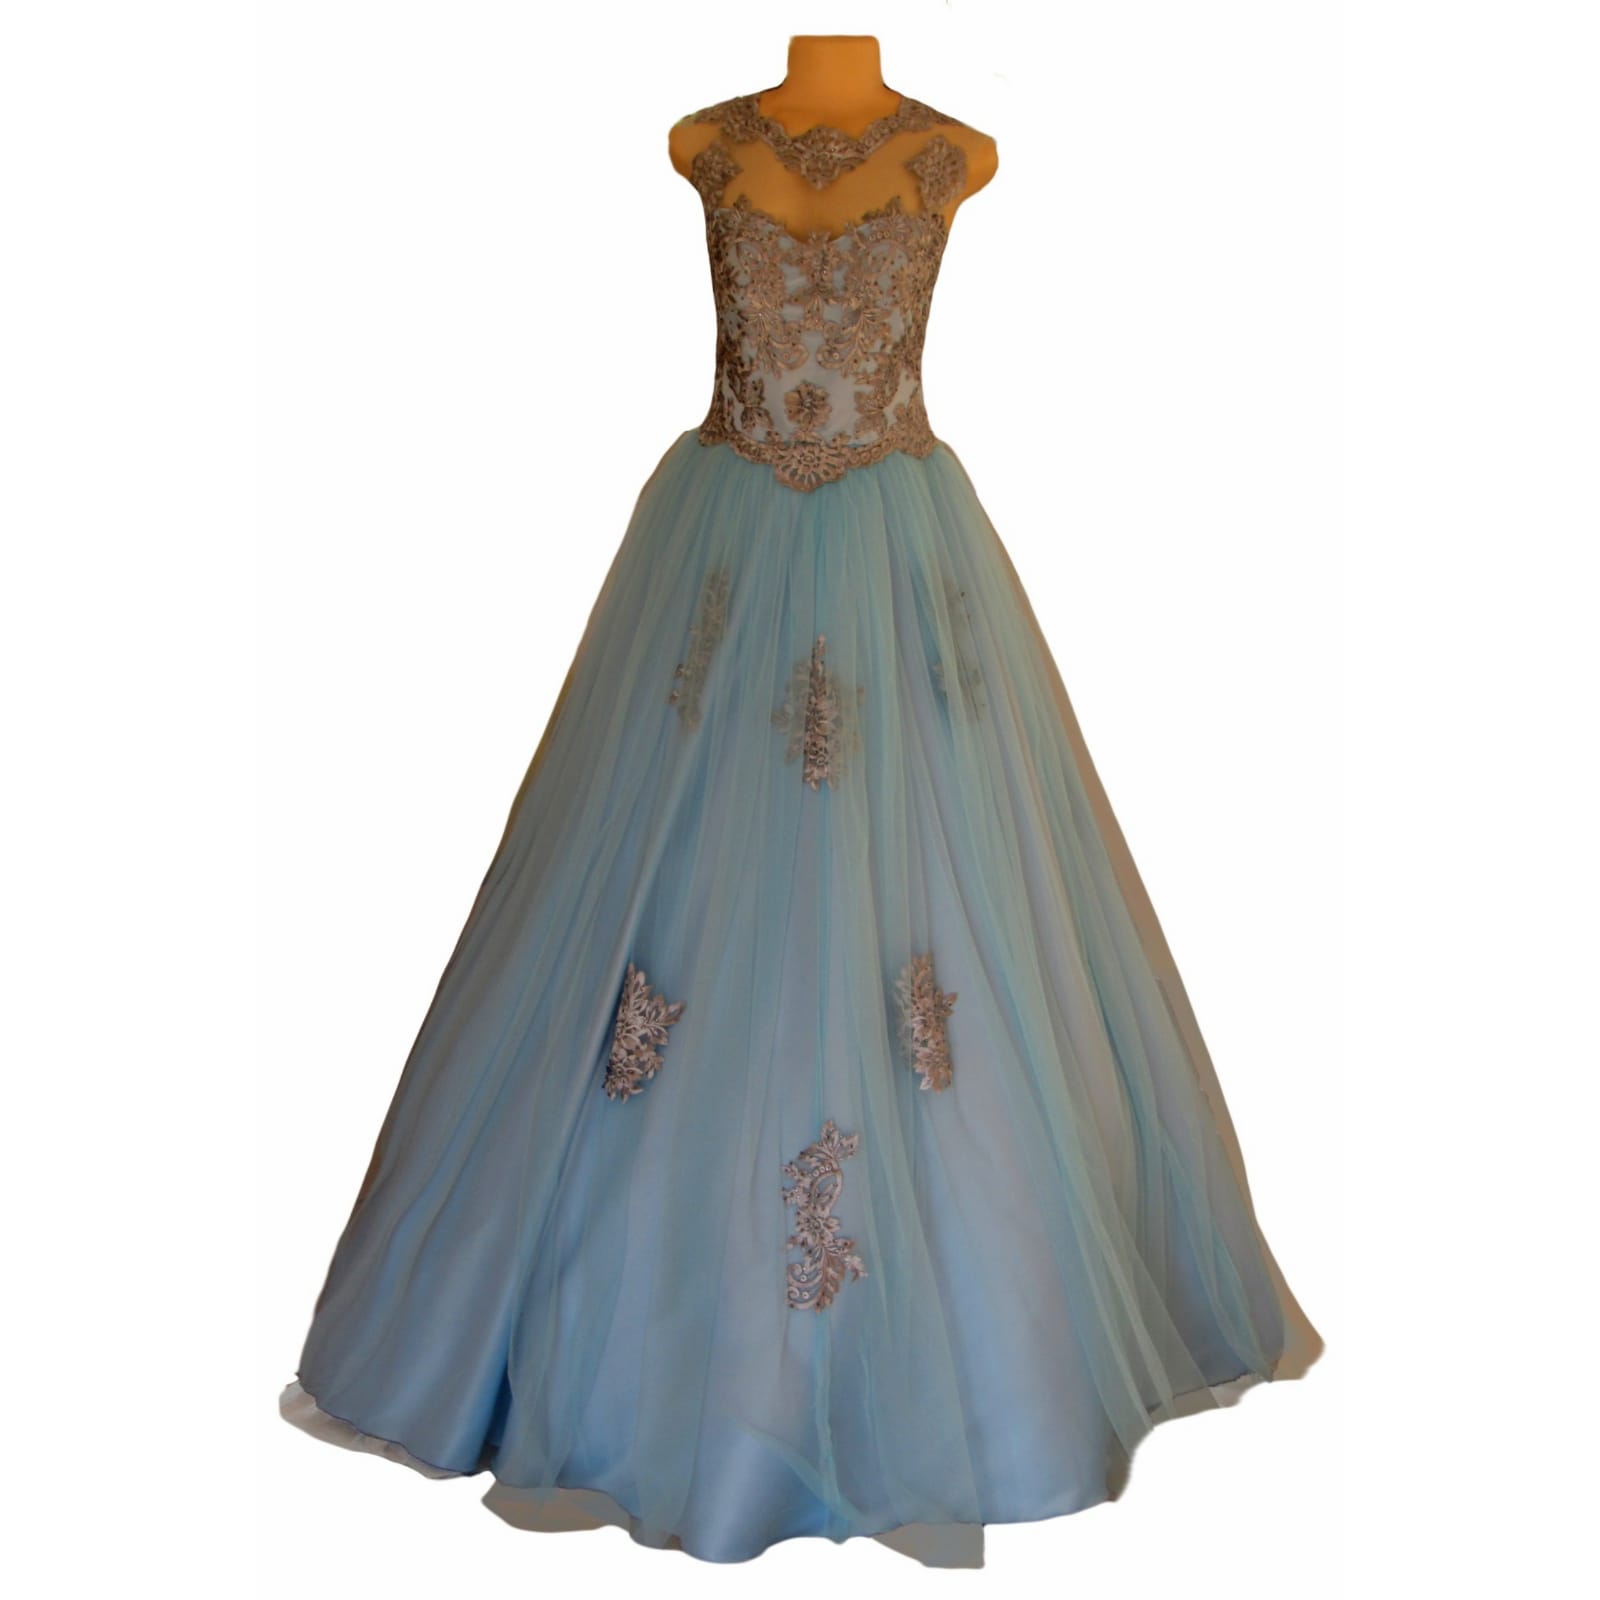 Powder blue and silver prom ball gown dress 8 powder blue and silver prom ball gown dress. With a lace-up back. Bodice detailed with silver lace and beads. Illusion neckline and shoulders. Bottom of the dress with tulle detailed with lace appliques.